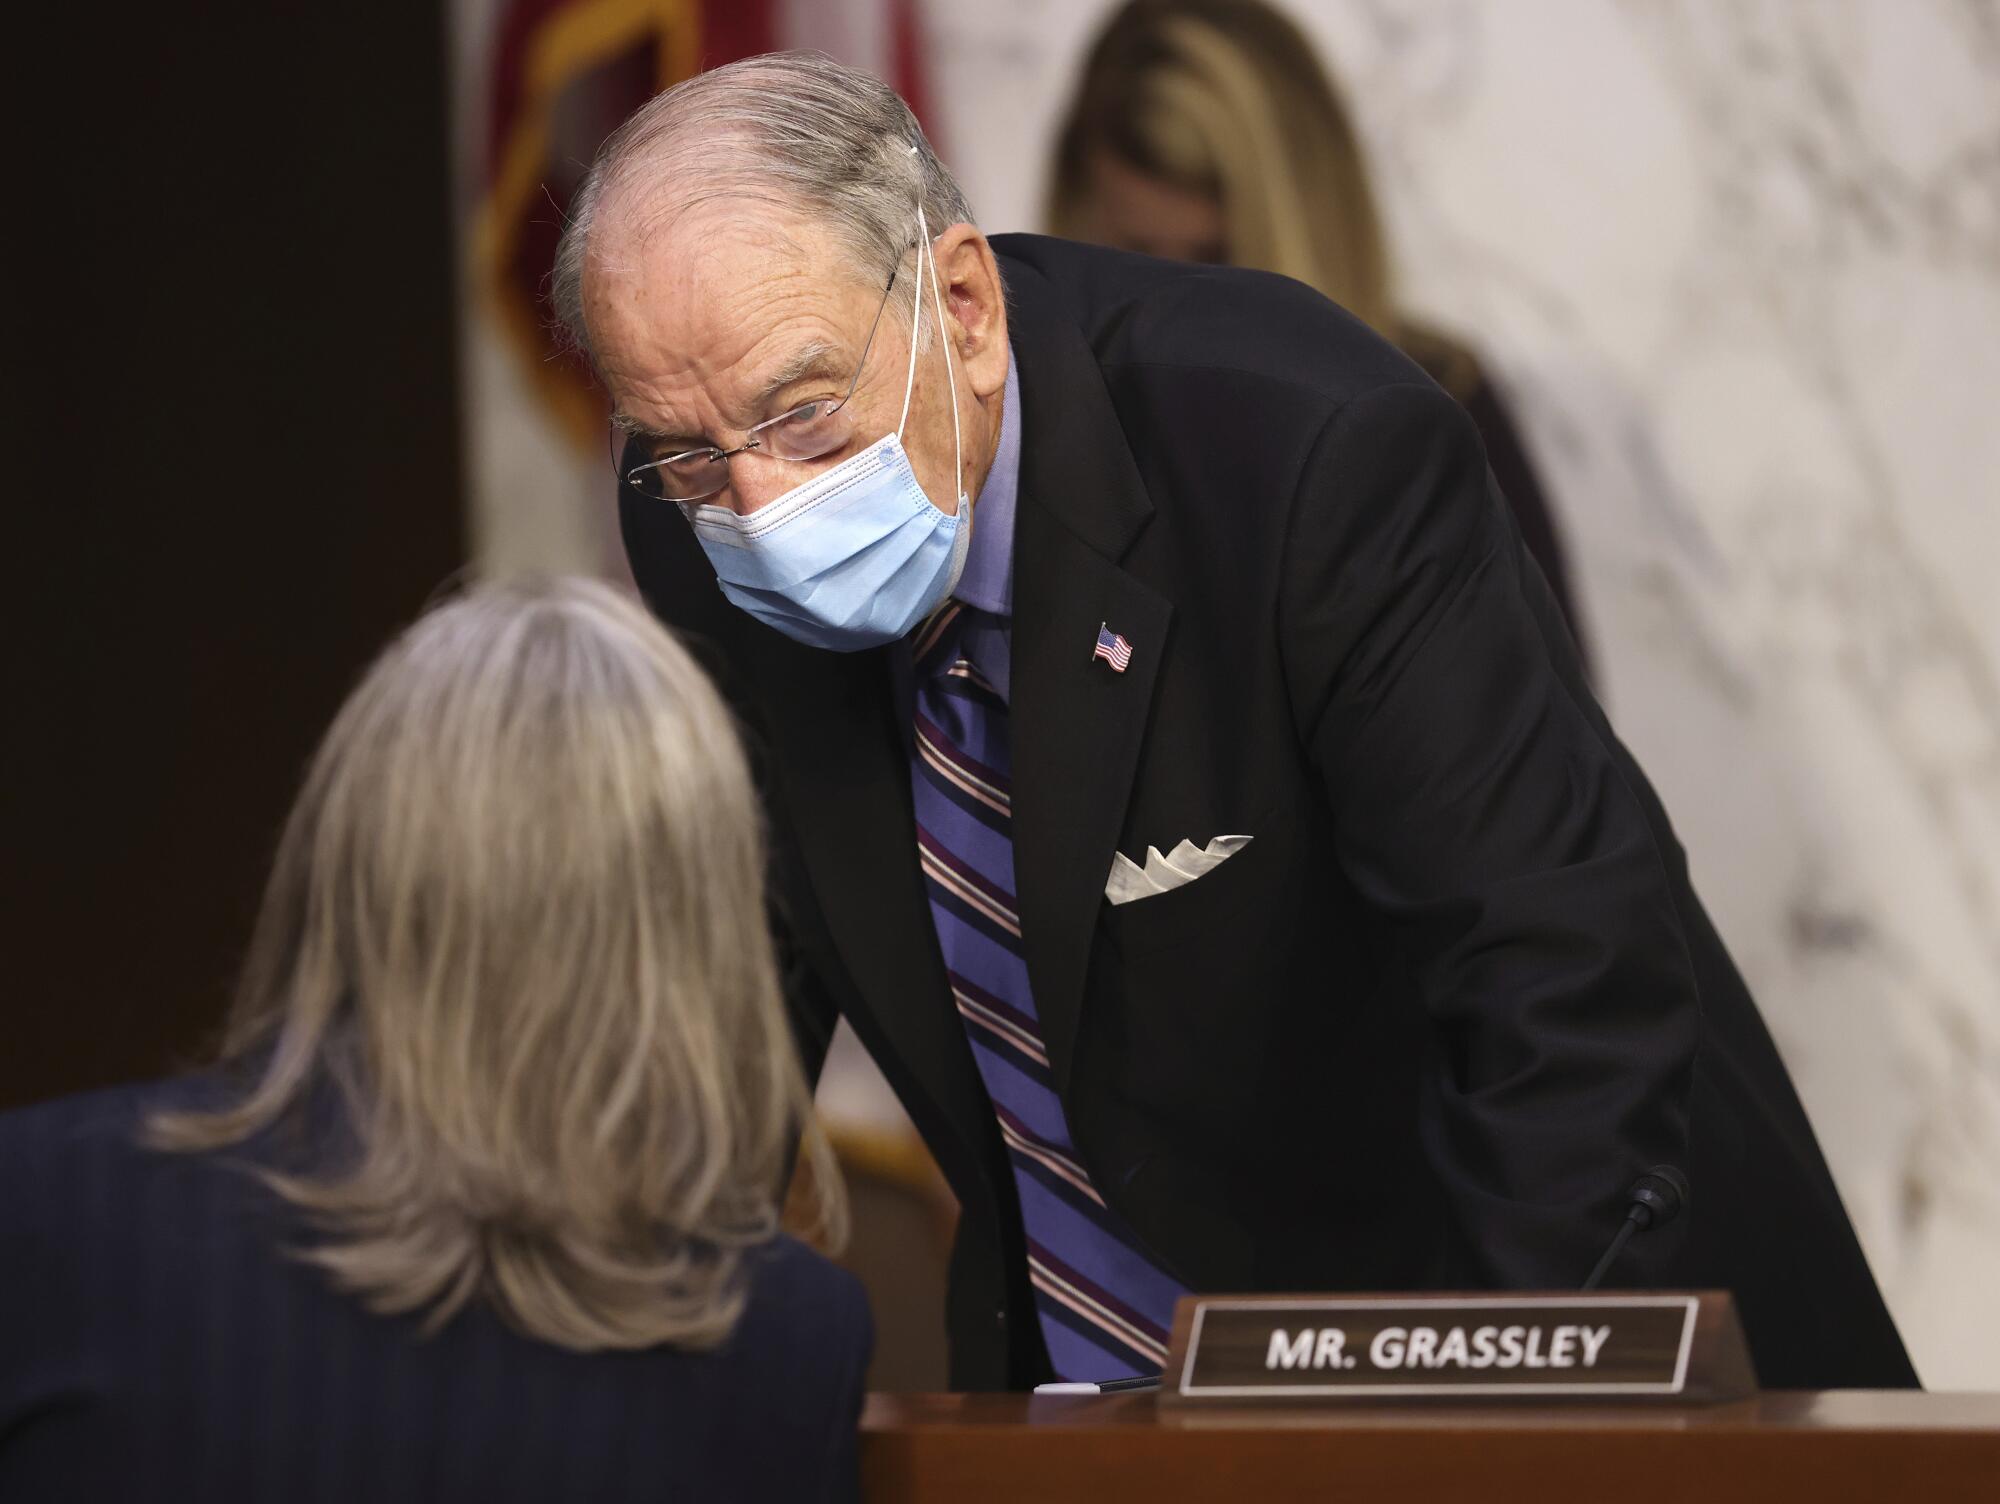 Sen. Chuck Grassley chats with a woman prior to the start of the hearing.